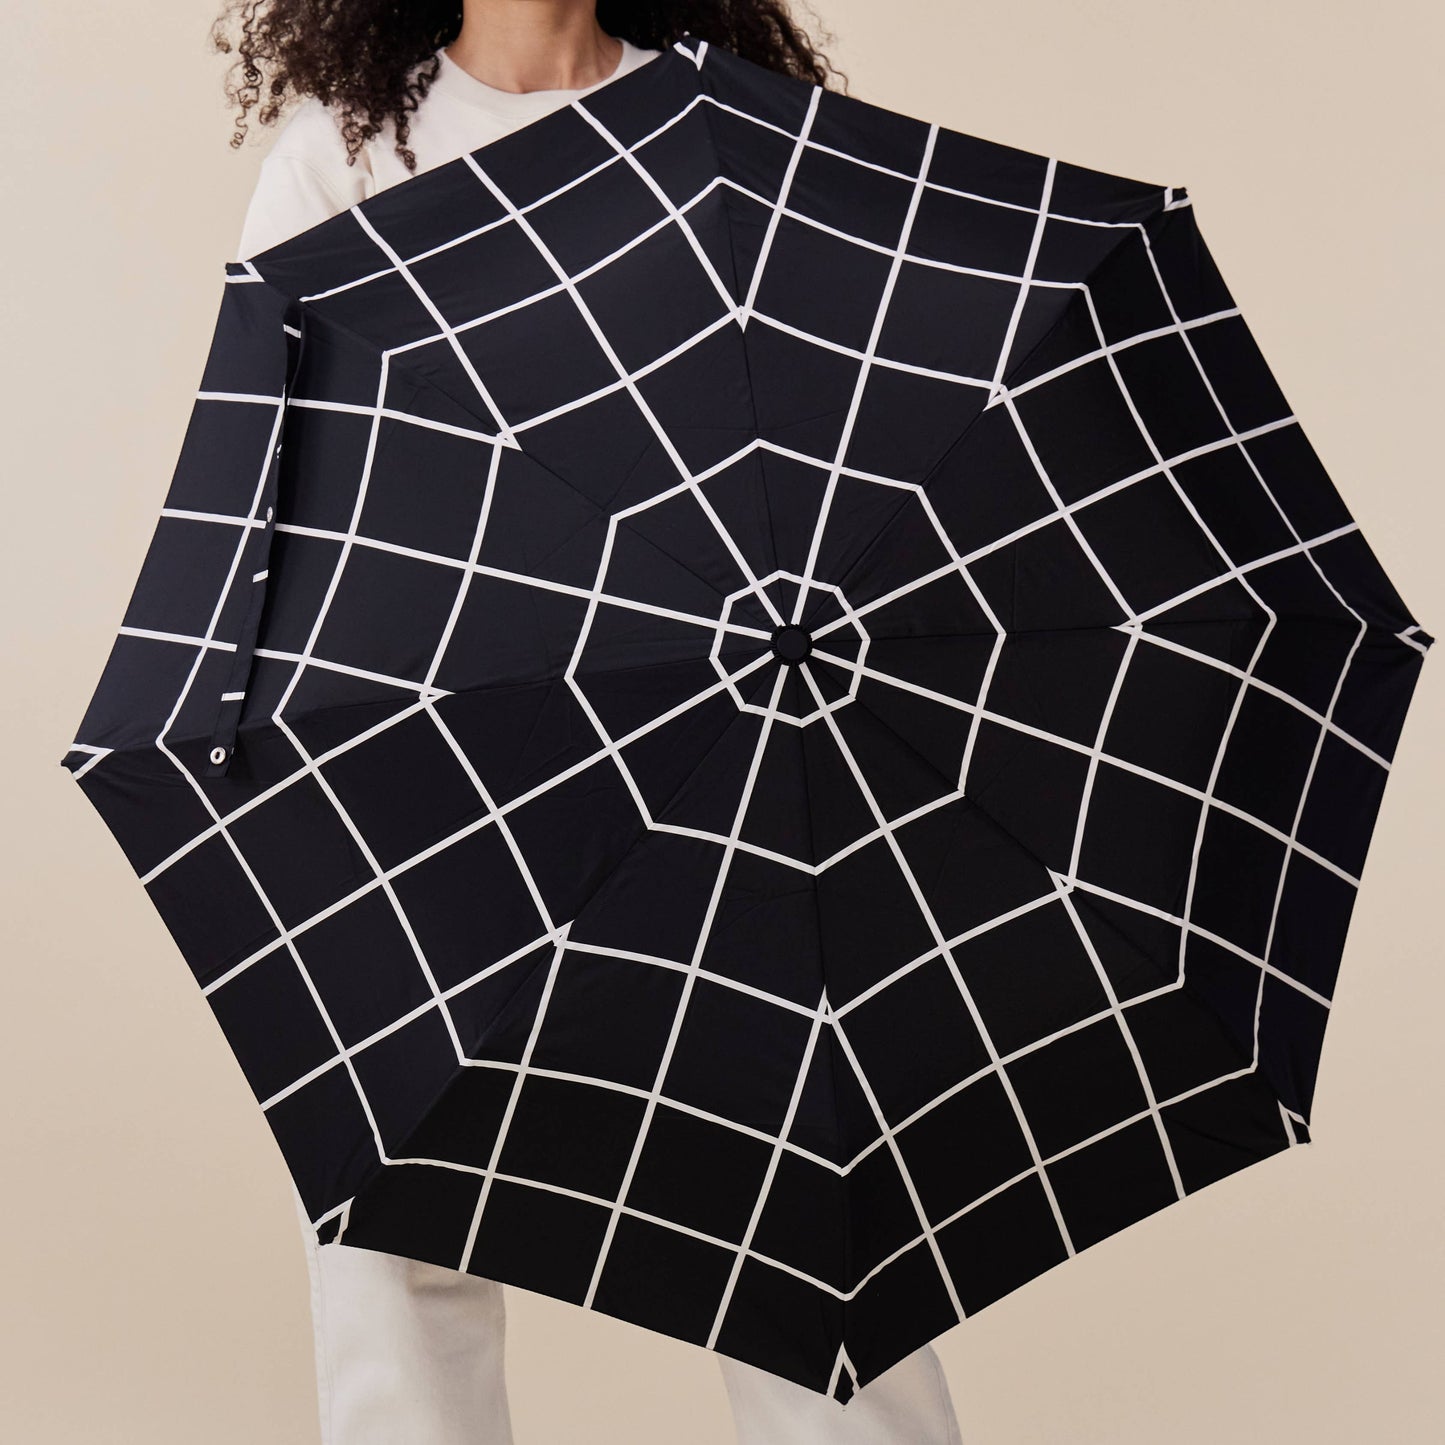 
                  
                    A woman carrying an opened duckhead umbrella in black grid pattern.
                  
                